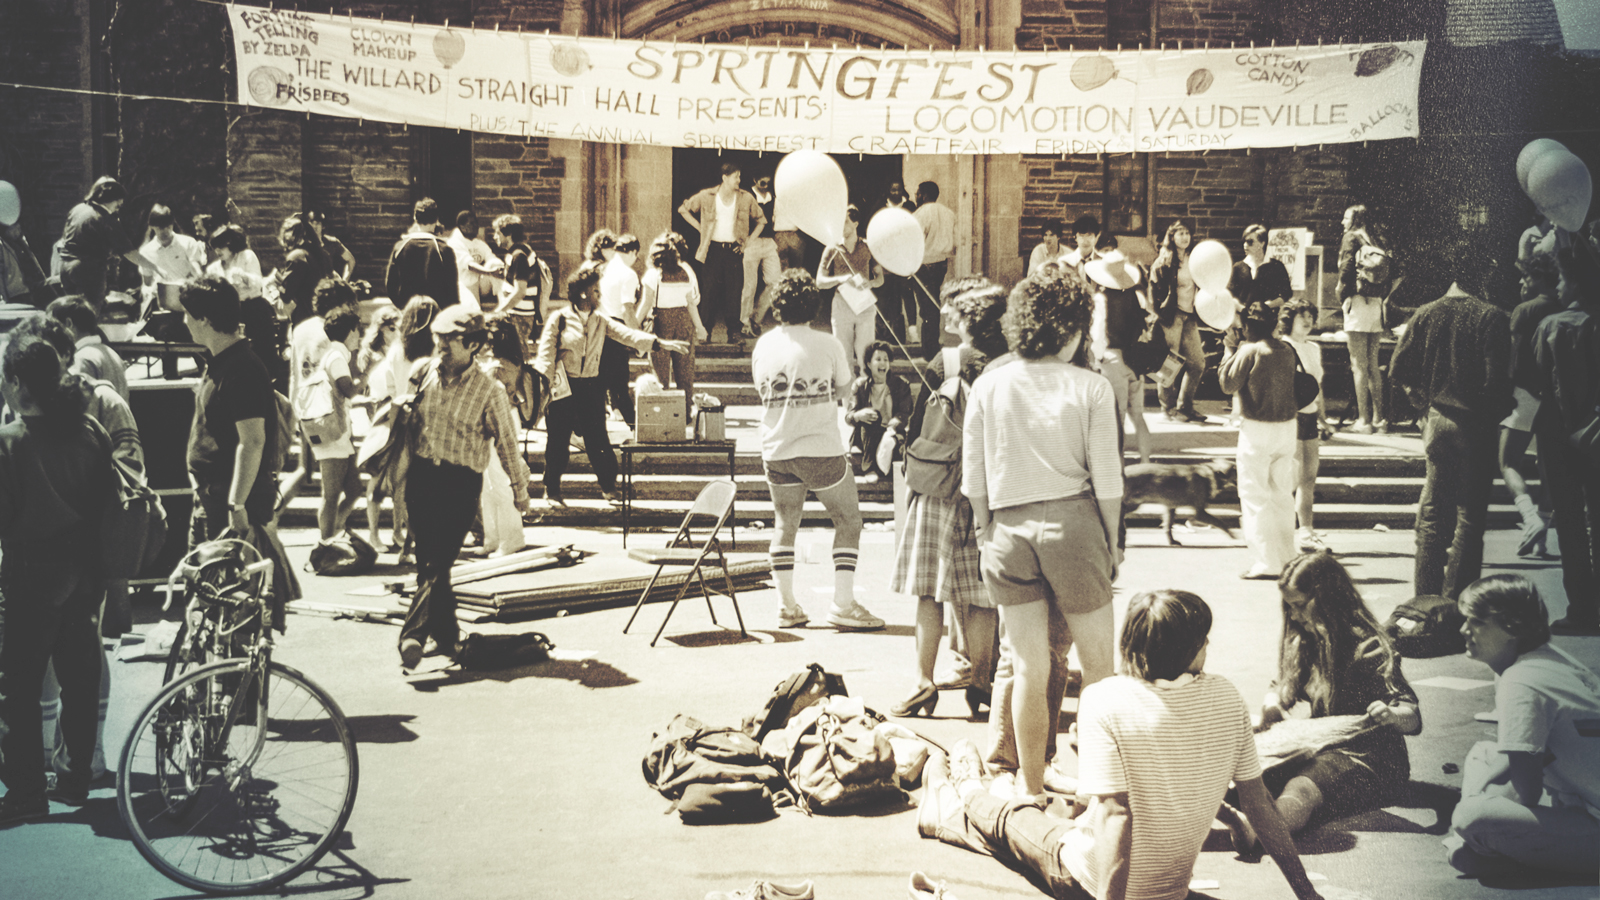 Carnival atmosphere in front of Willard Straight, late 1970s